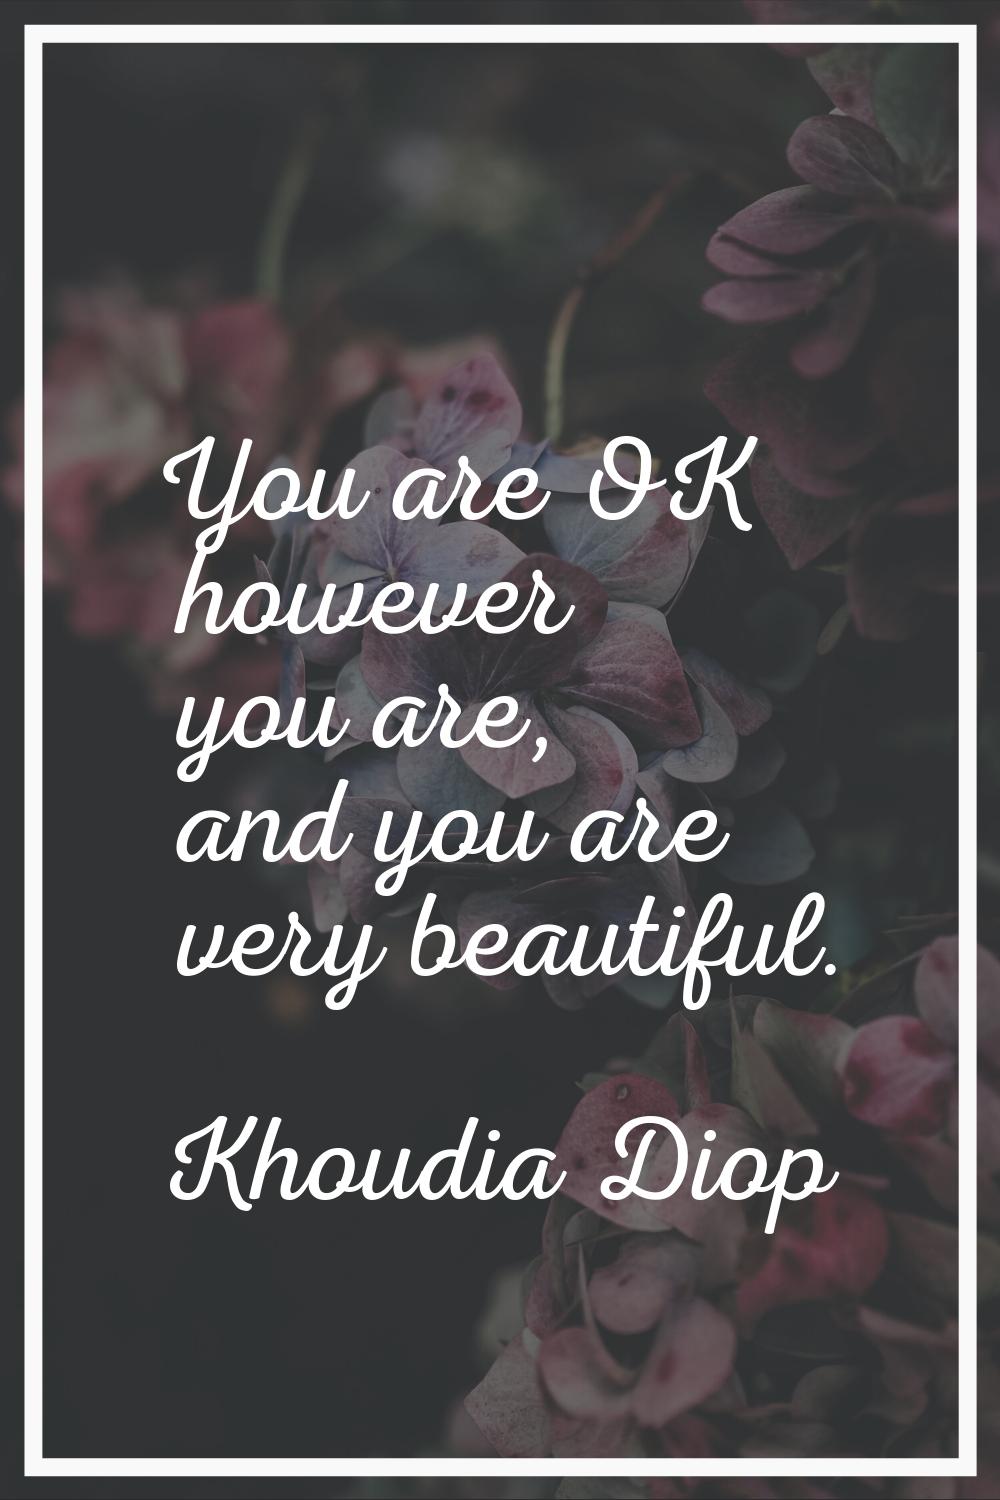 You are OK however you are, and you are very beautiful.